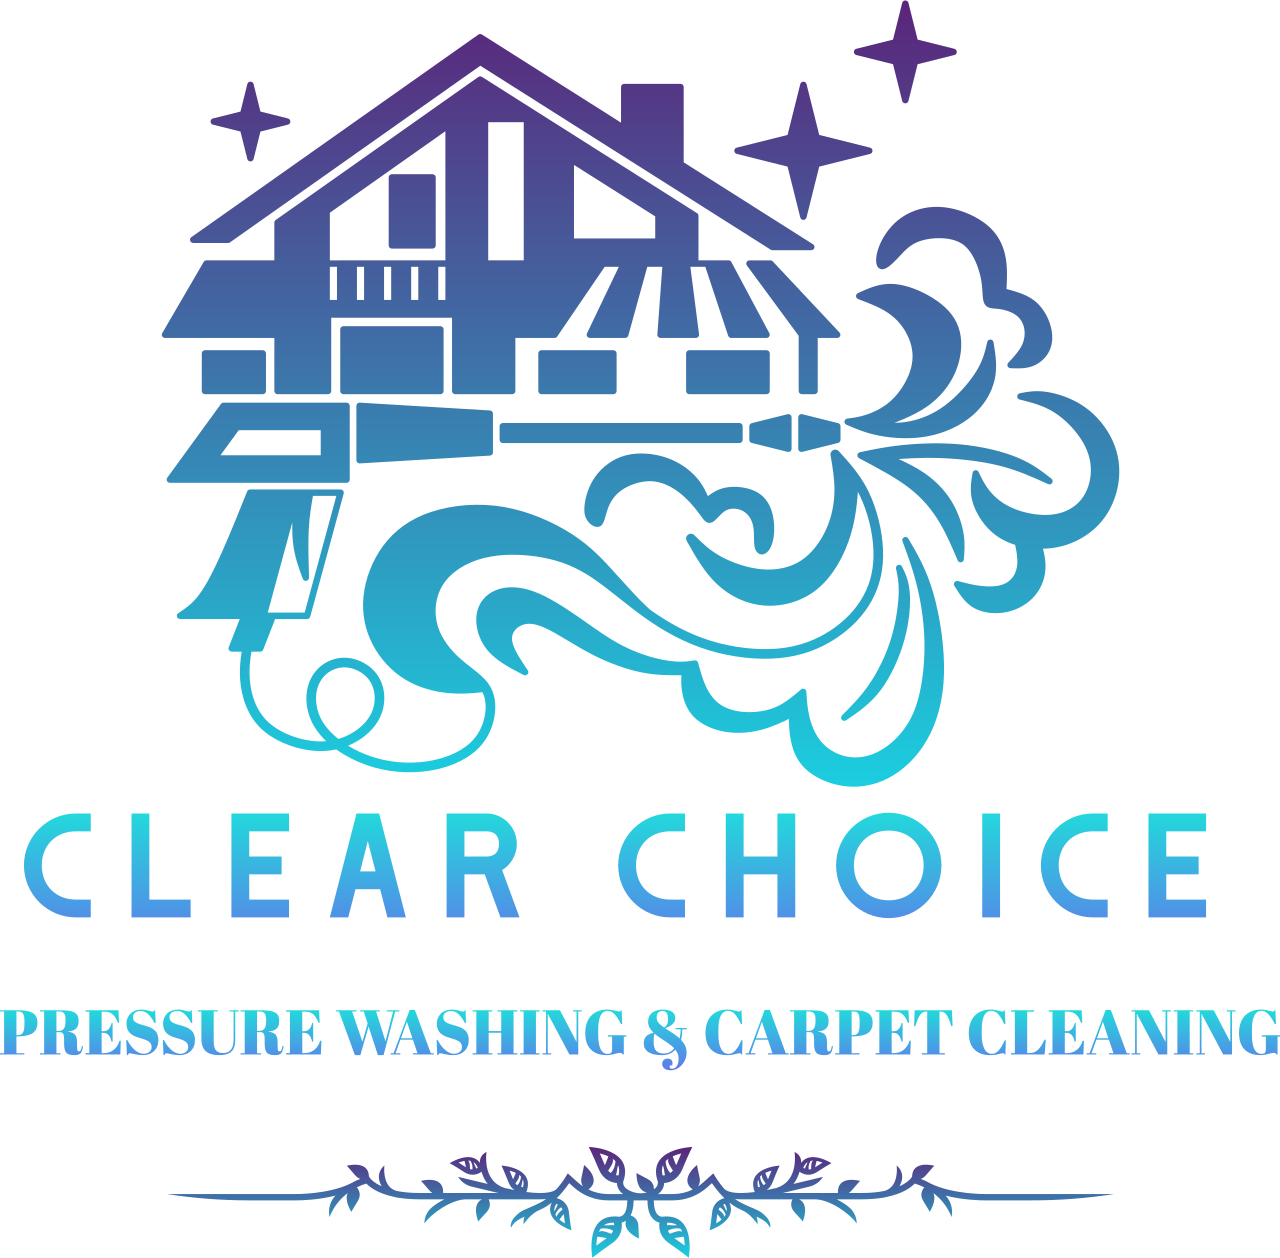 Clear Choice Pressure Washing and Carpet Cleaning LLC's logo